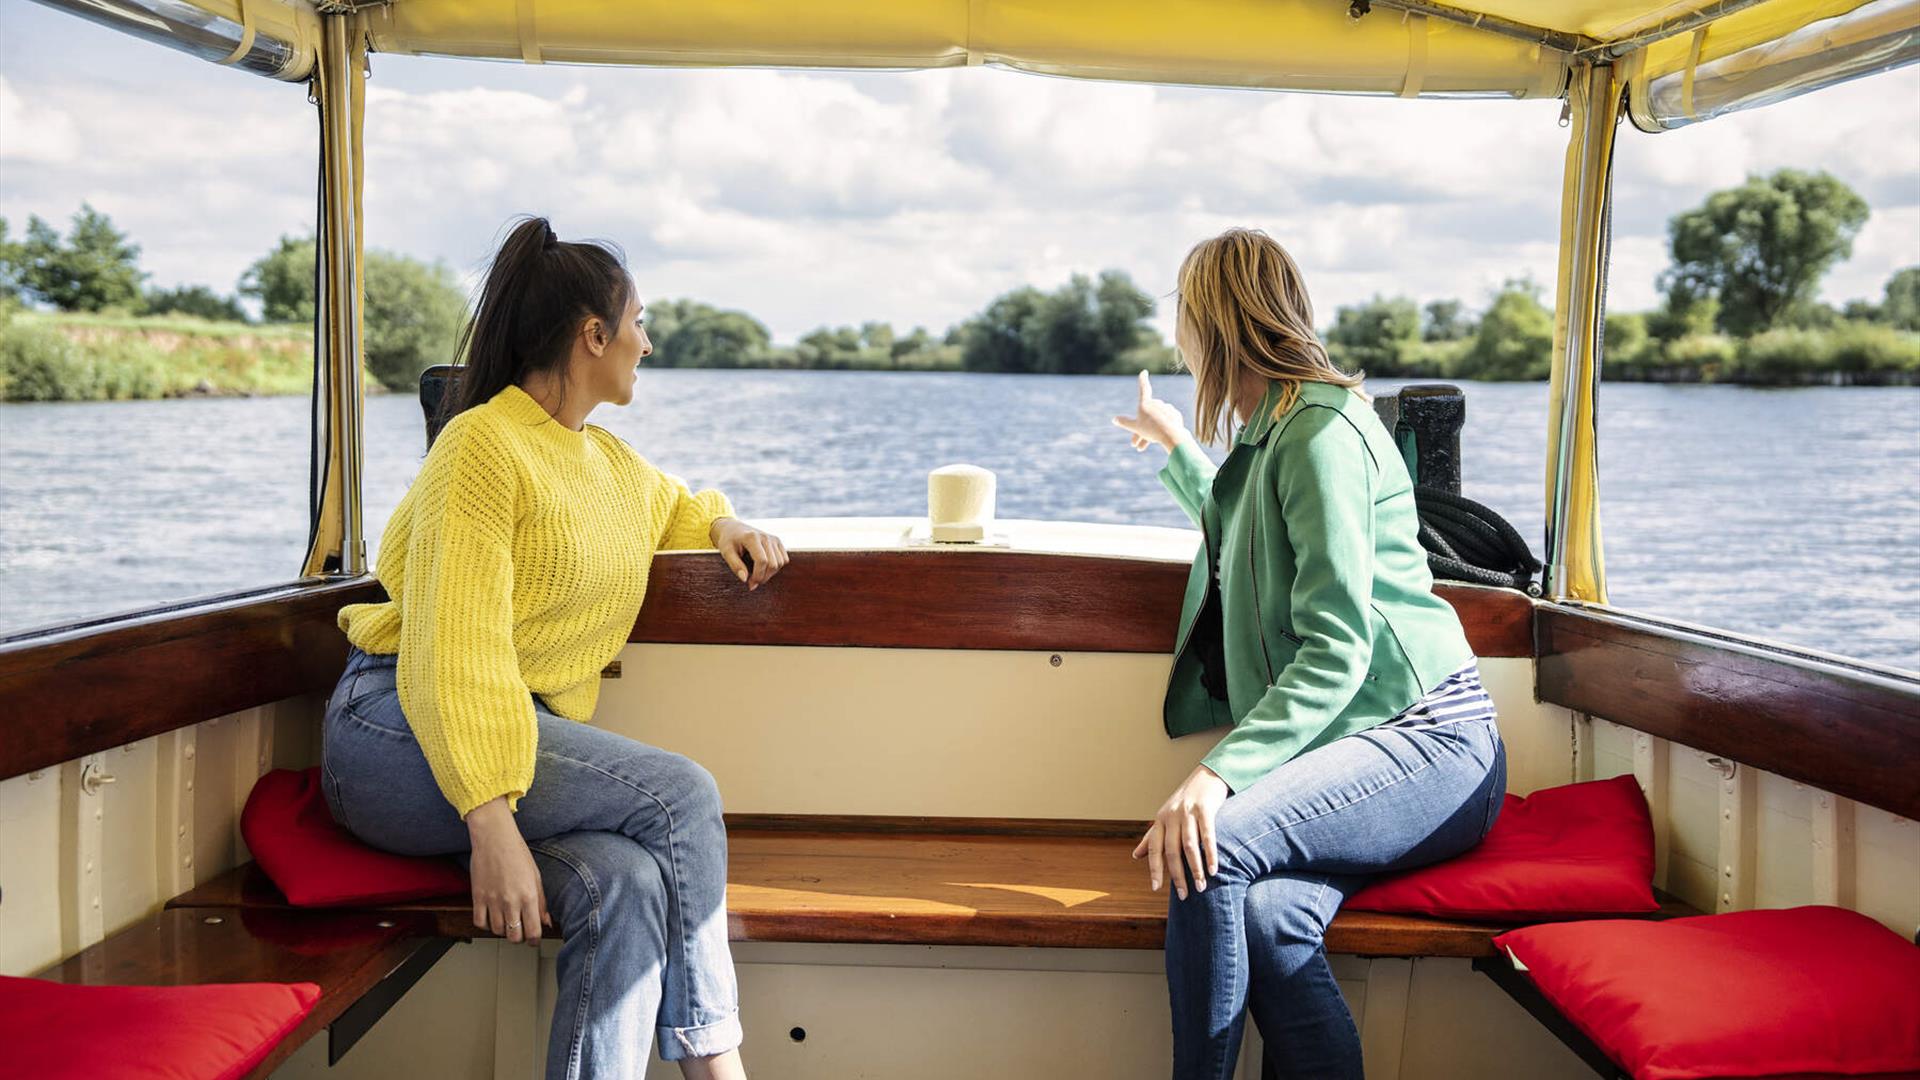 Guests onboard the M. V. Kingfisher admire the views as the boat floats along the River Bann